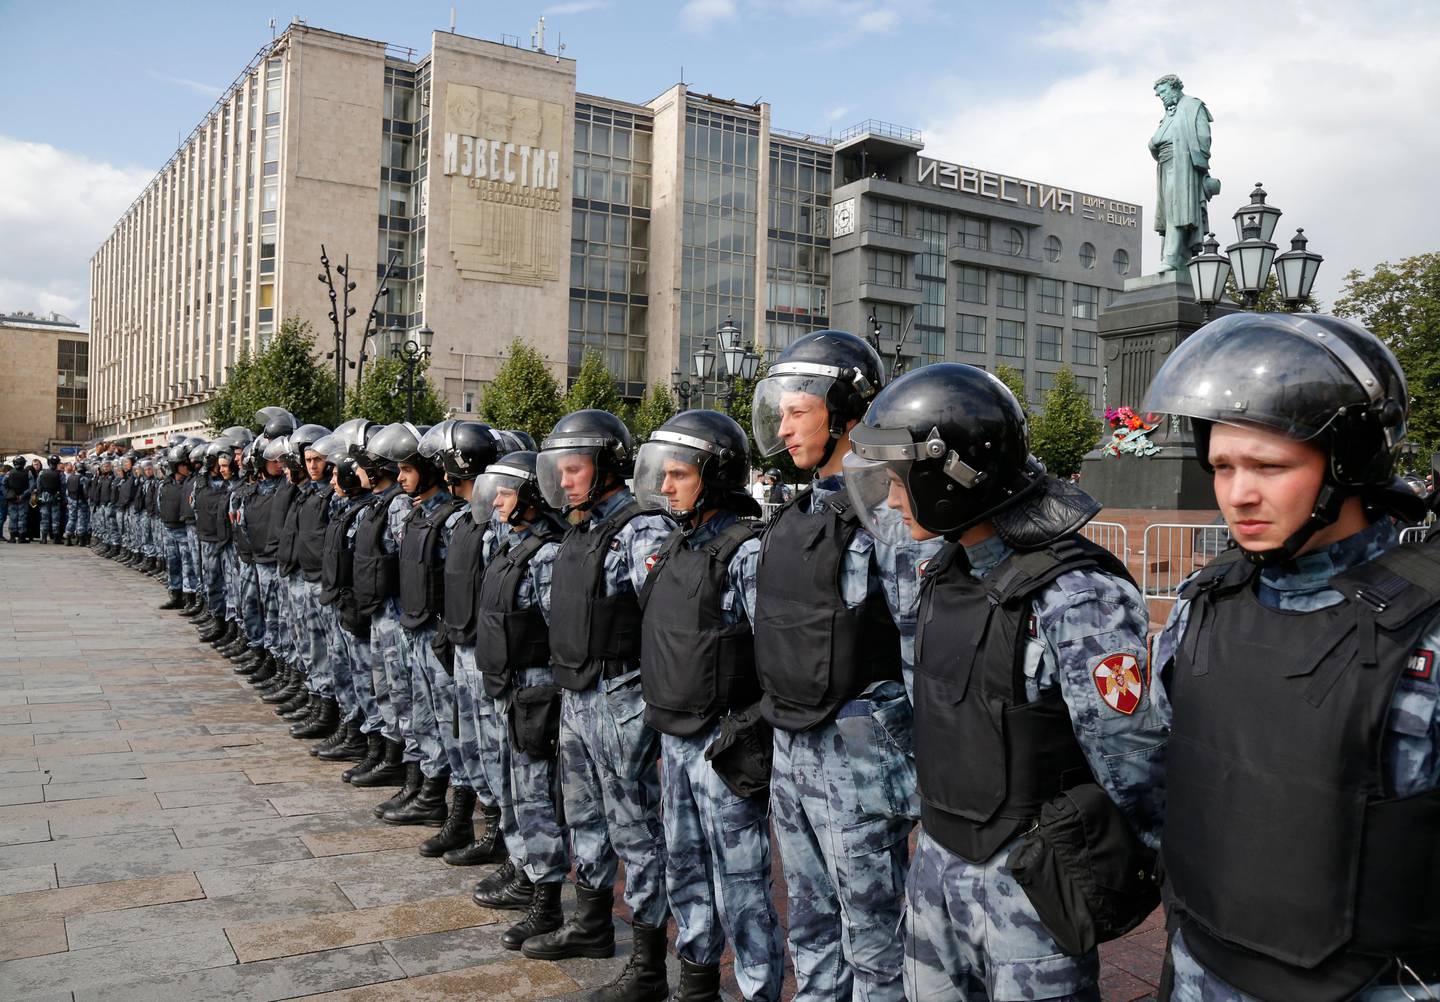 Police block a square during an unsanctioned rally in the center of Moscow, Russia, Saturday, Aug. 3, 2019. Moscow police on Saturday detained nearly 90 people protesting the exclusion of some independent and opposition candidates from the city council ballot, a monitoring group said, a week after arresting nearly 1,400 at a similar protest. (AP Photo/ Alexander Zemlianichenko)